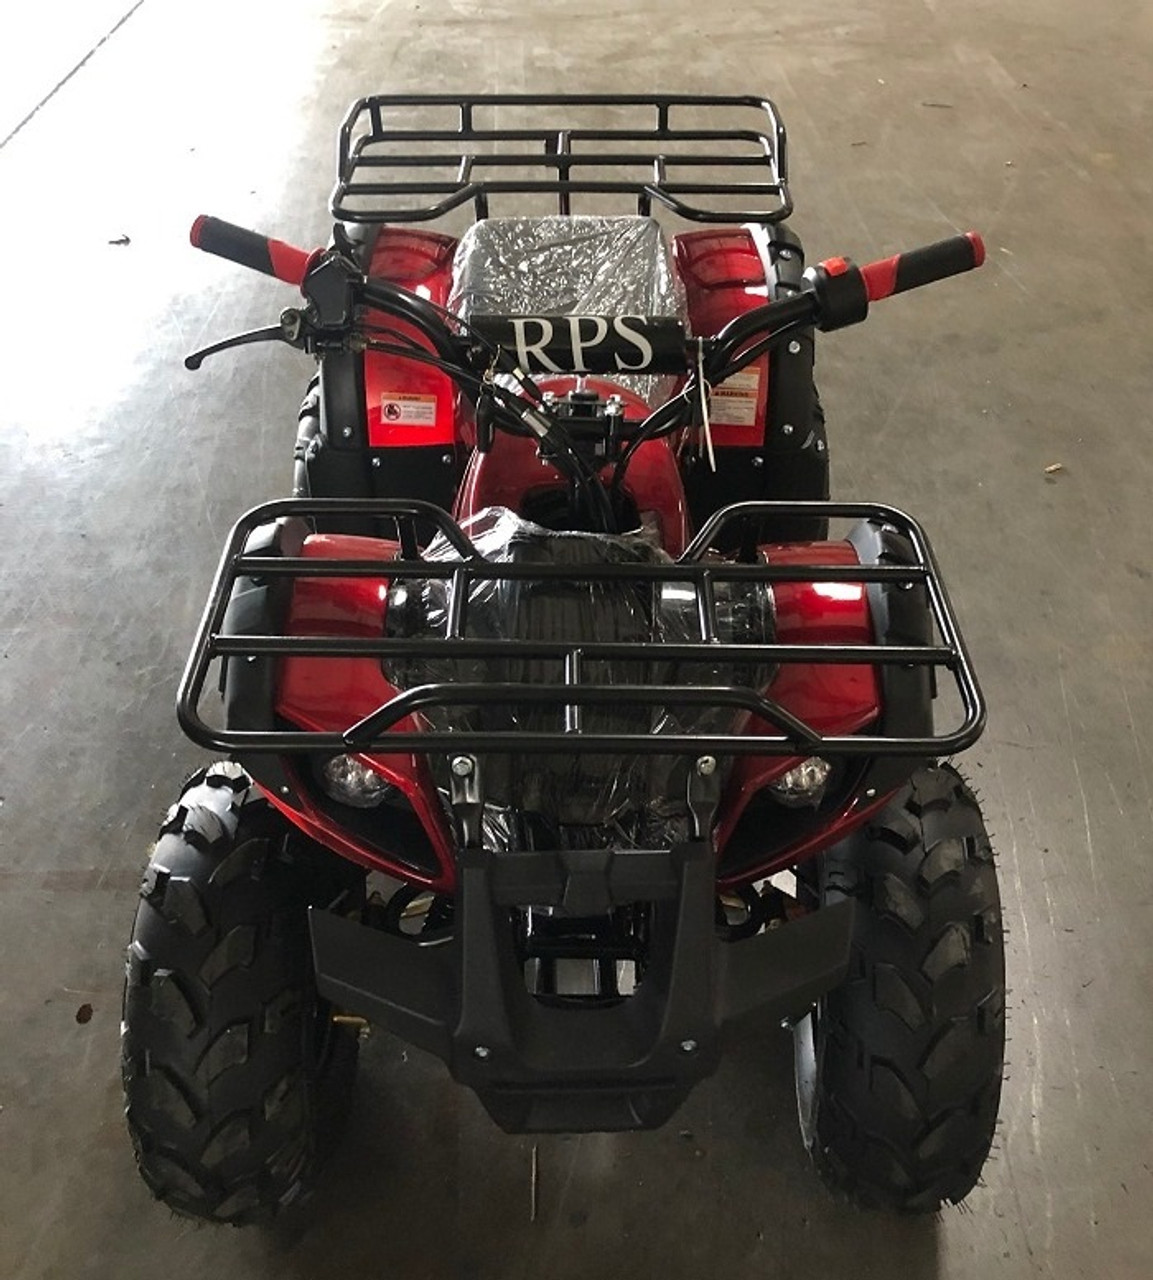 Buy the RPS 125cc Raider 8 Kids ATV For Sale at